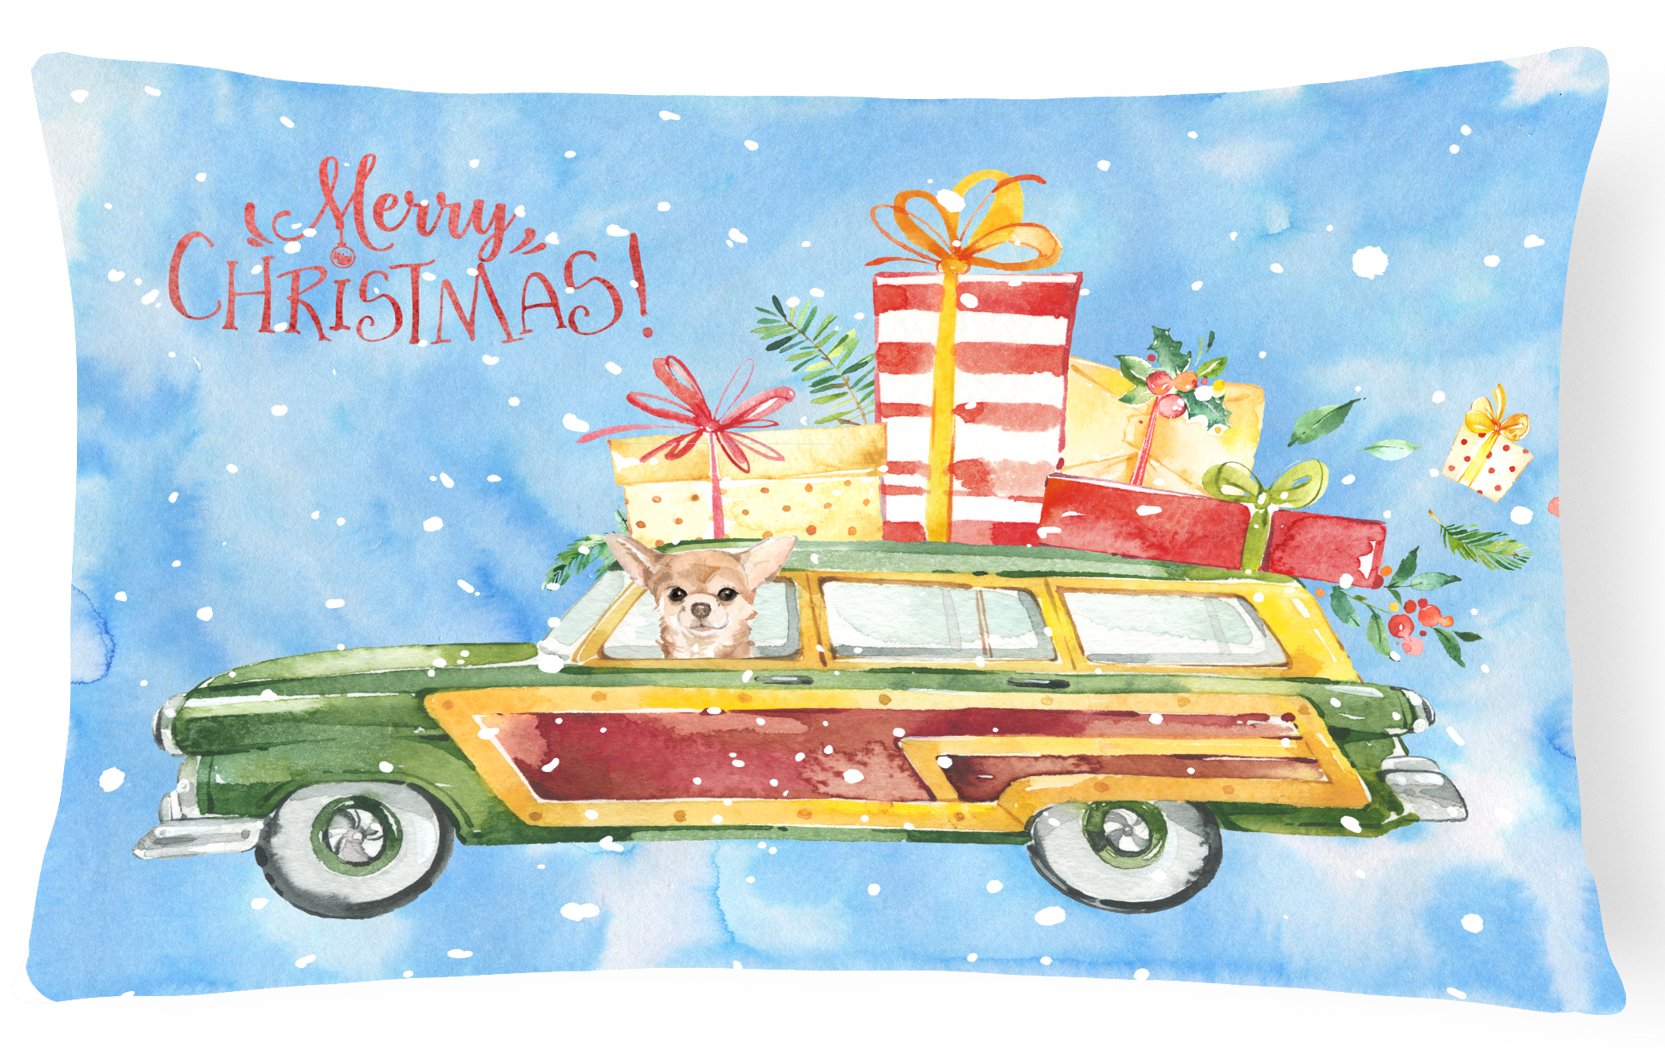 Merry Christmas Chihuahua Canvas Fabric Decorative Pillow CK2449PW1216 by Caroline's Treasures